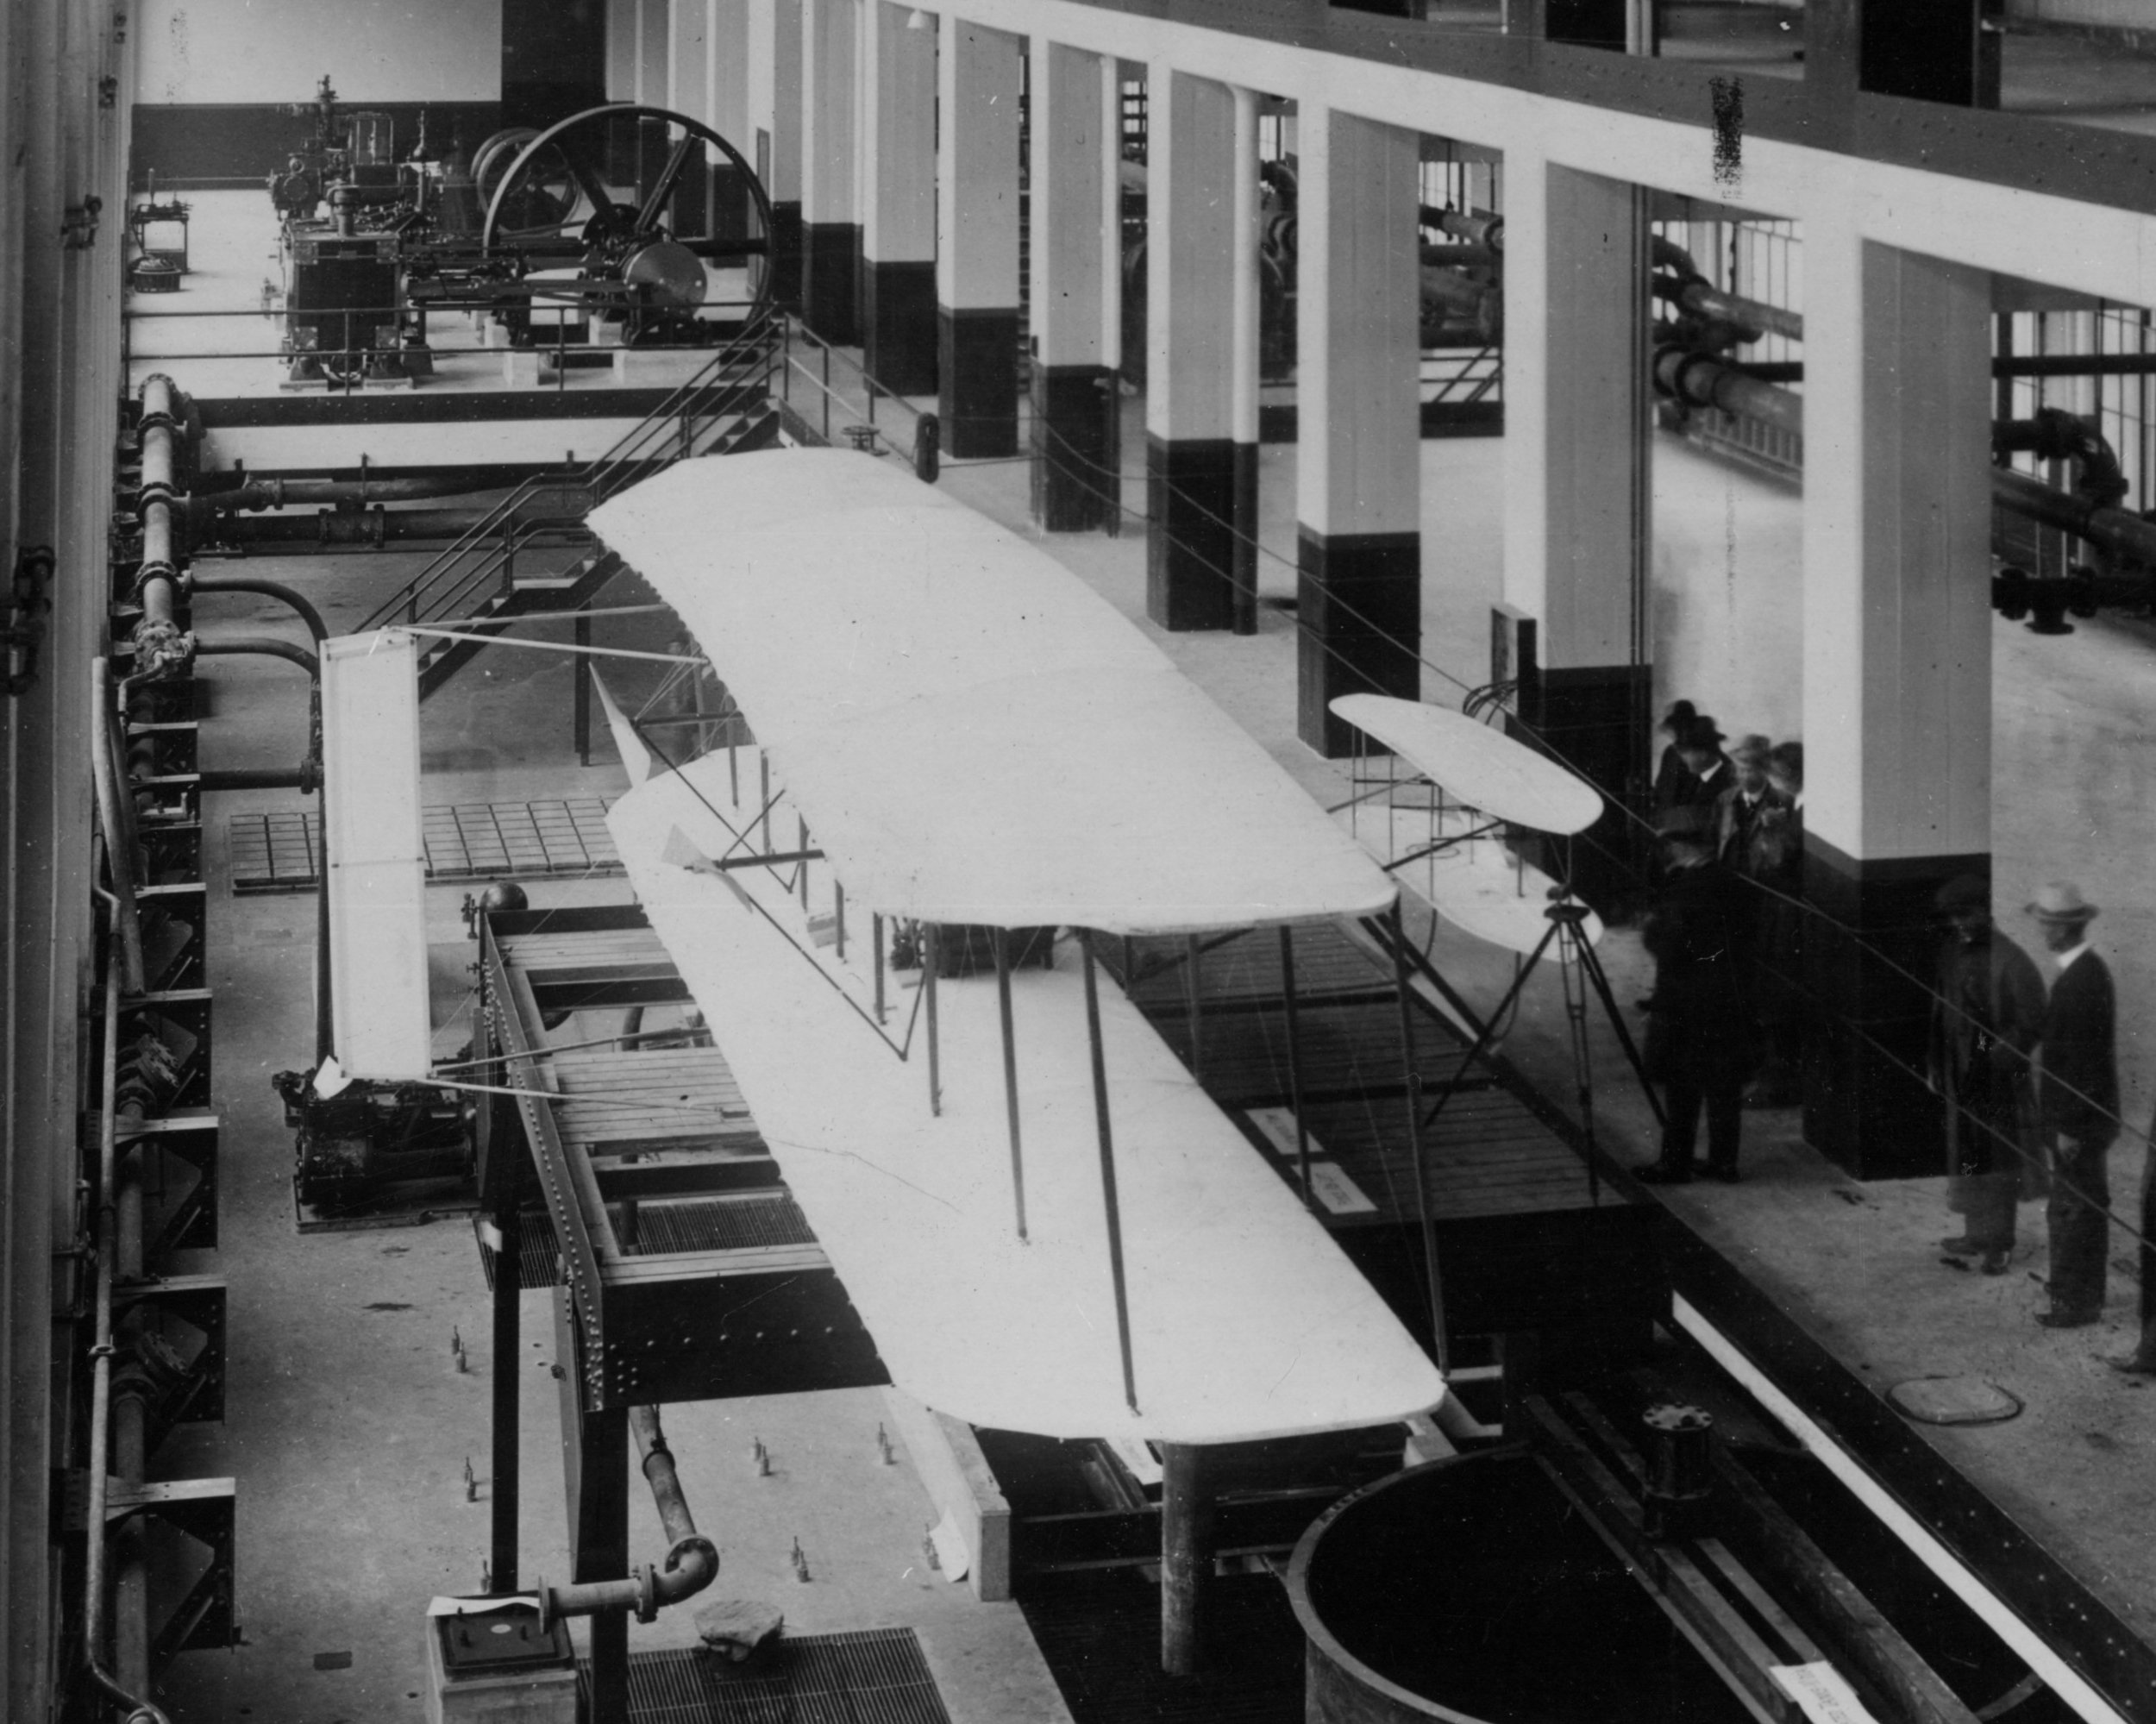  The 1903 Wright Flyer on display at MIT in 1916. 